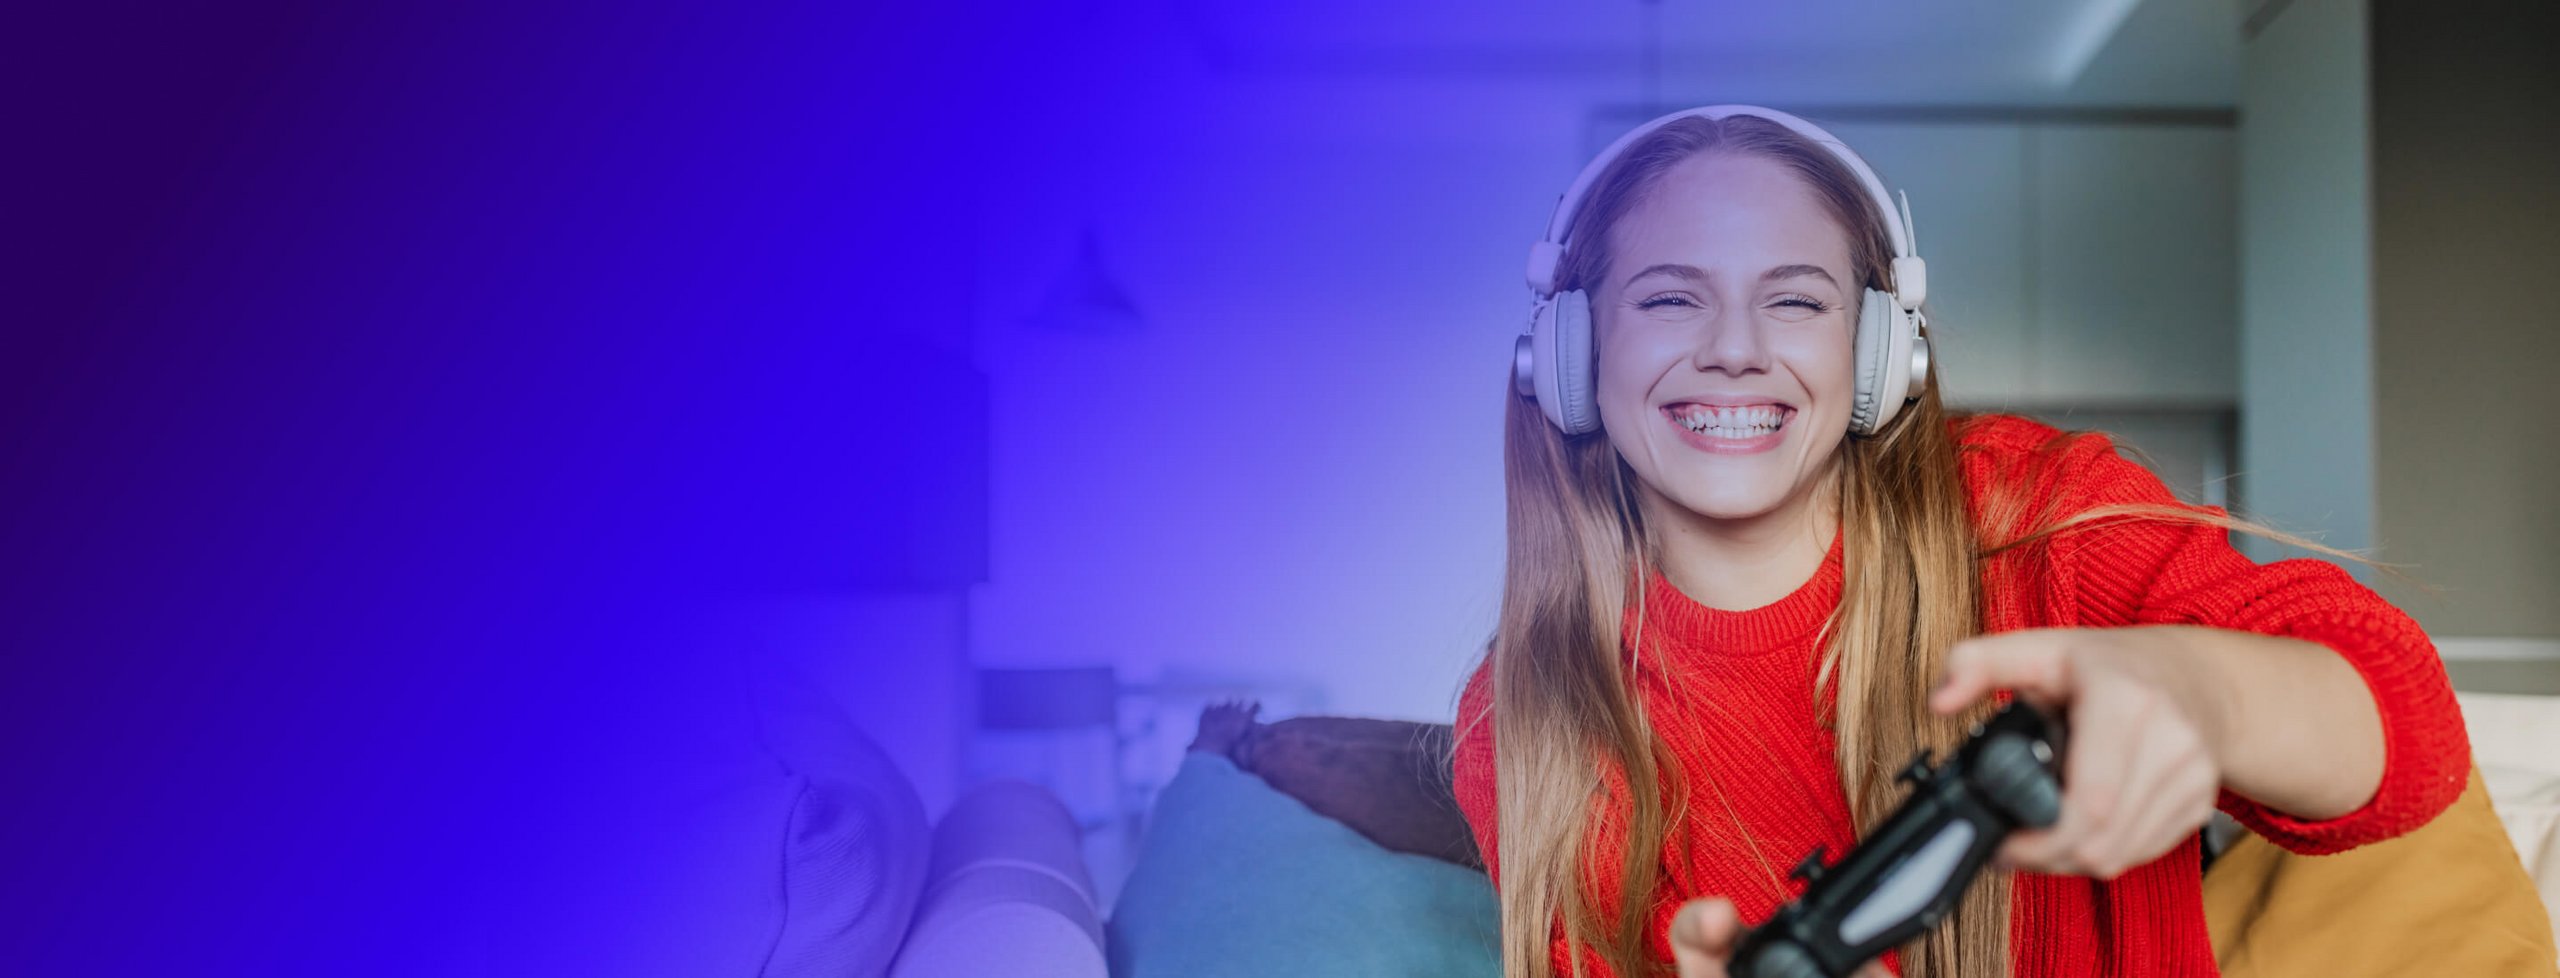 girl playing a game while wearing headphones and holding a game console controller 